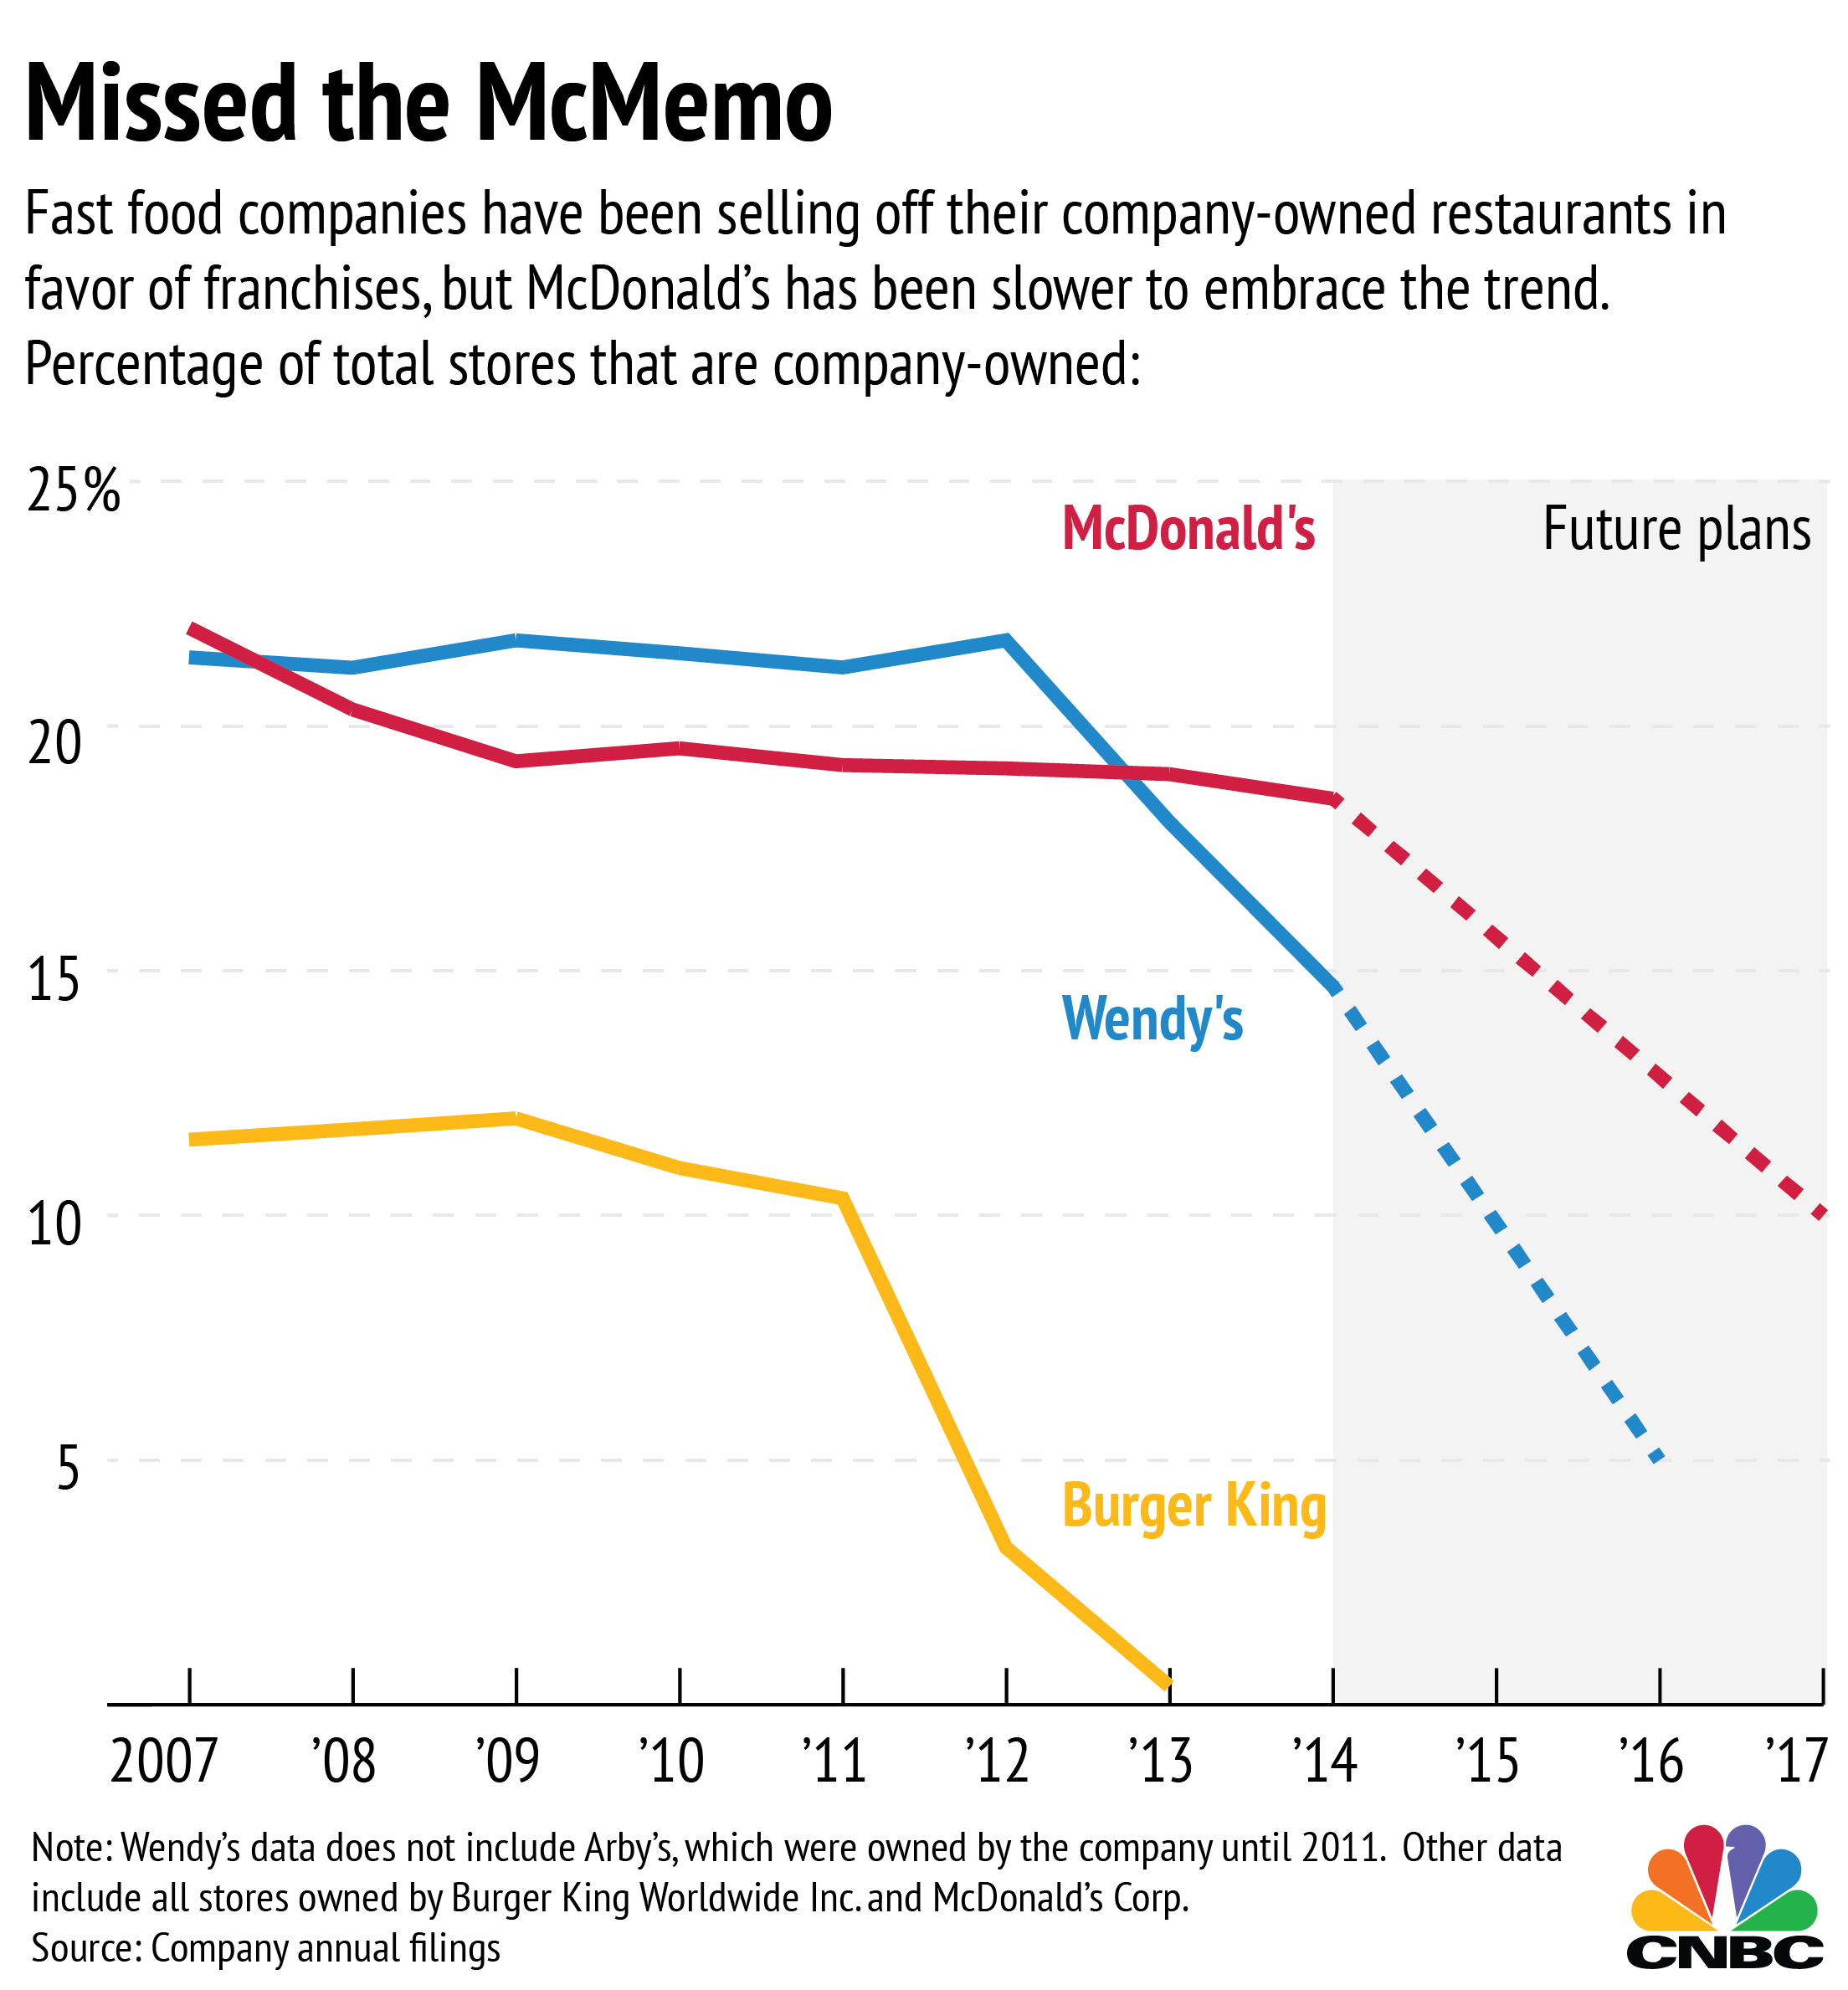 What plans does McDonald's have for the future?